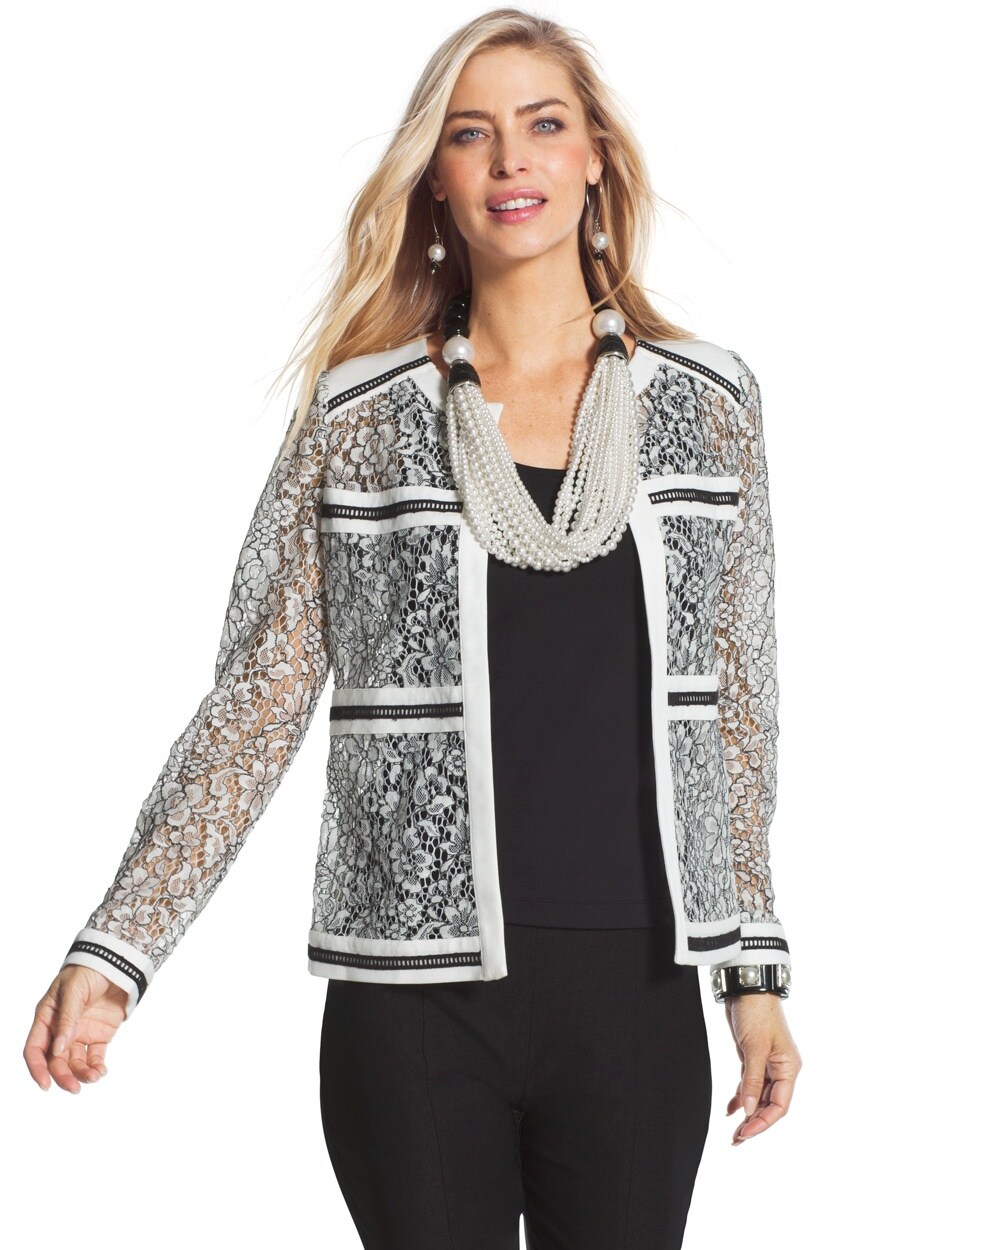 Two-Toned Lace Jacket - Chico's